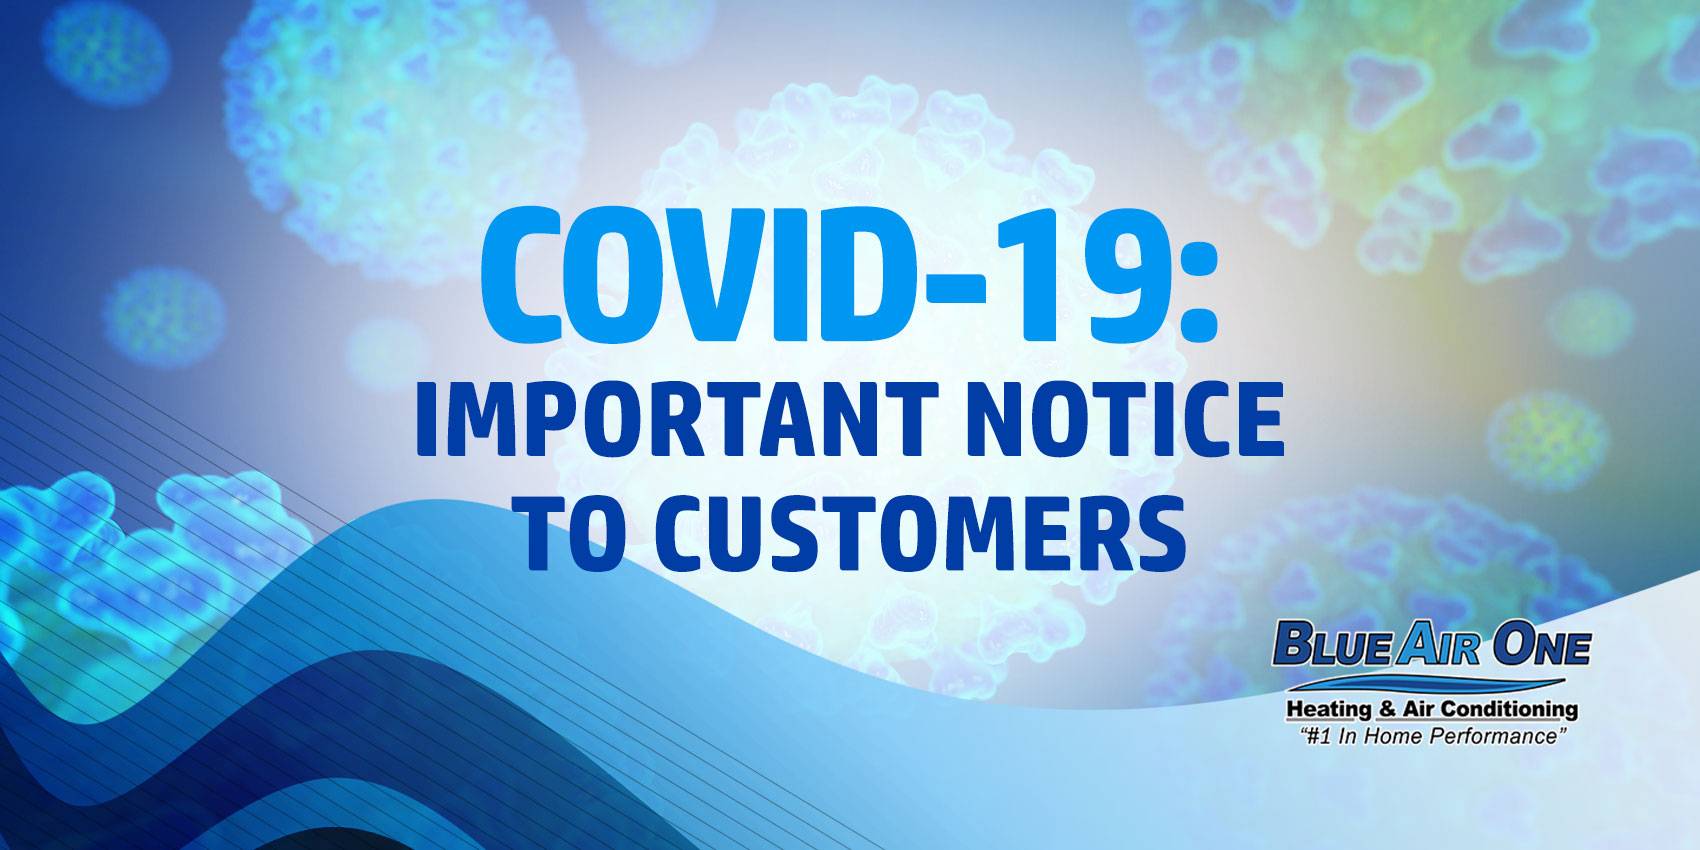 Covid-19 Update important notice to customers